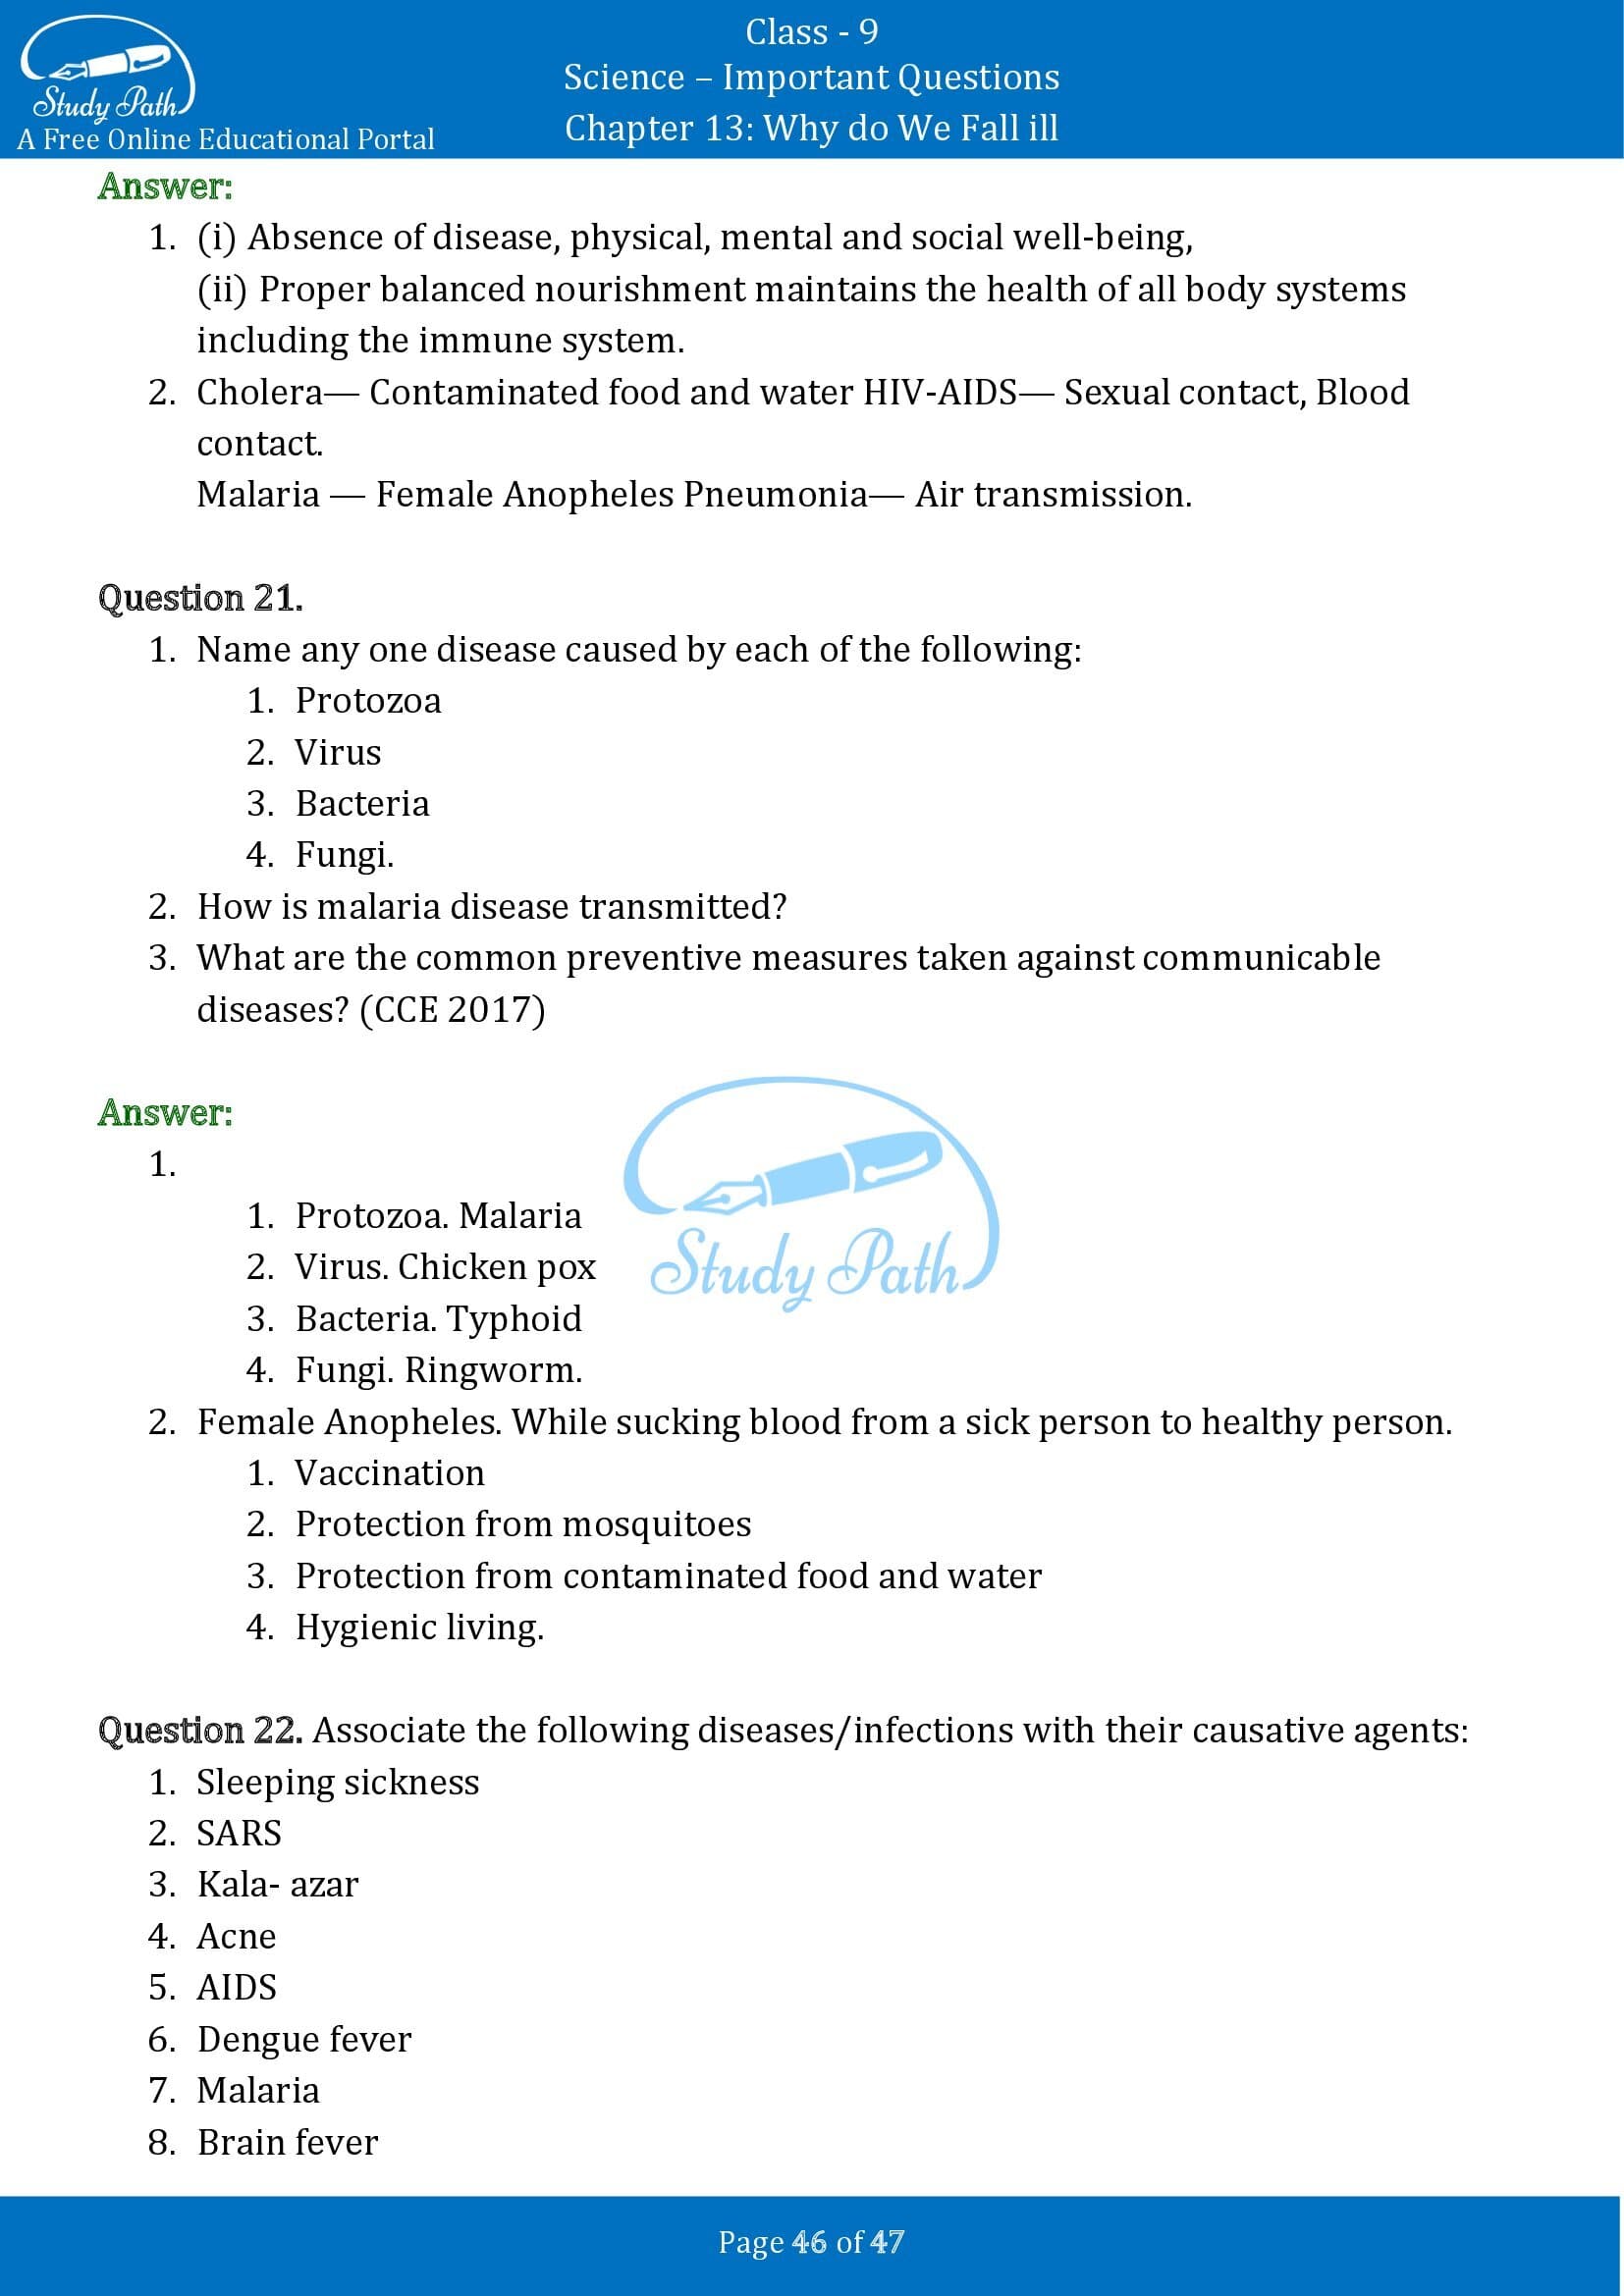 Important Questions for Class 9 Science Chapter 13 Why do We Fall ill 00046